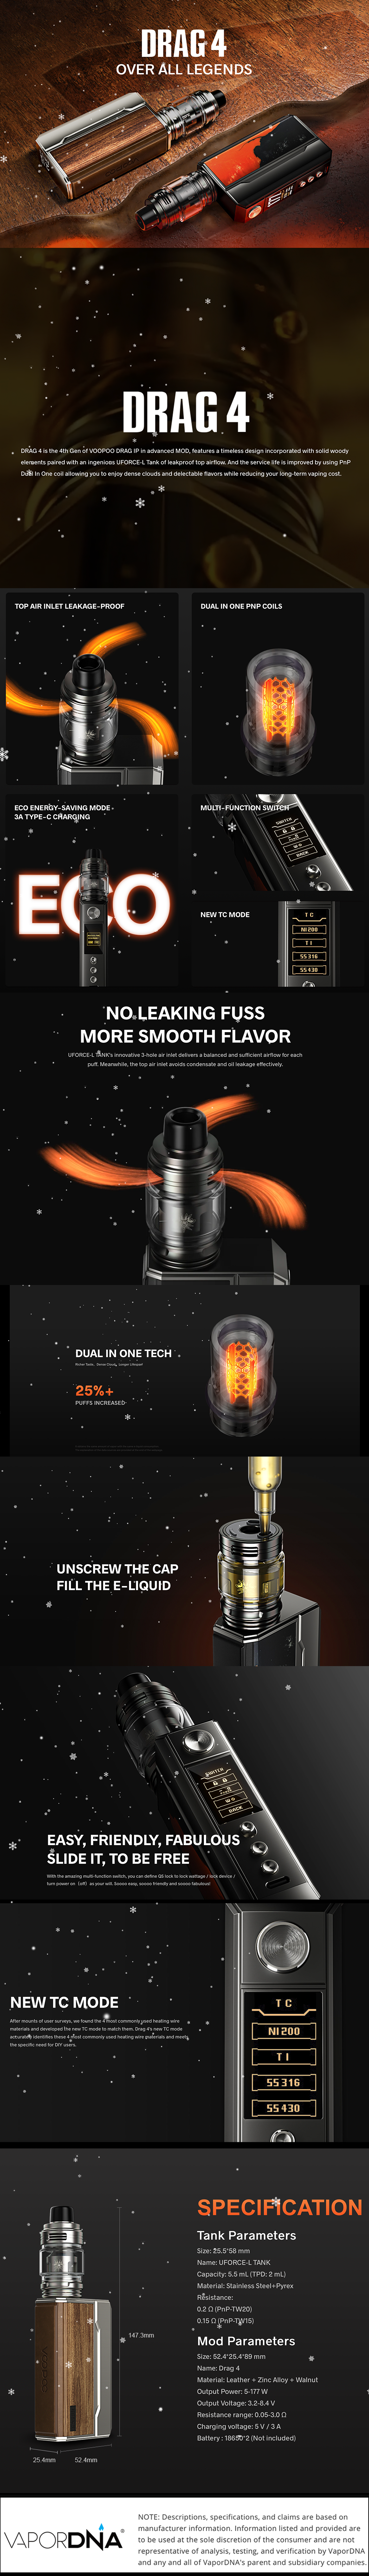 VooPoo Drag 4 Infographic